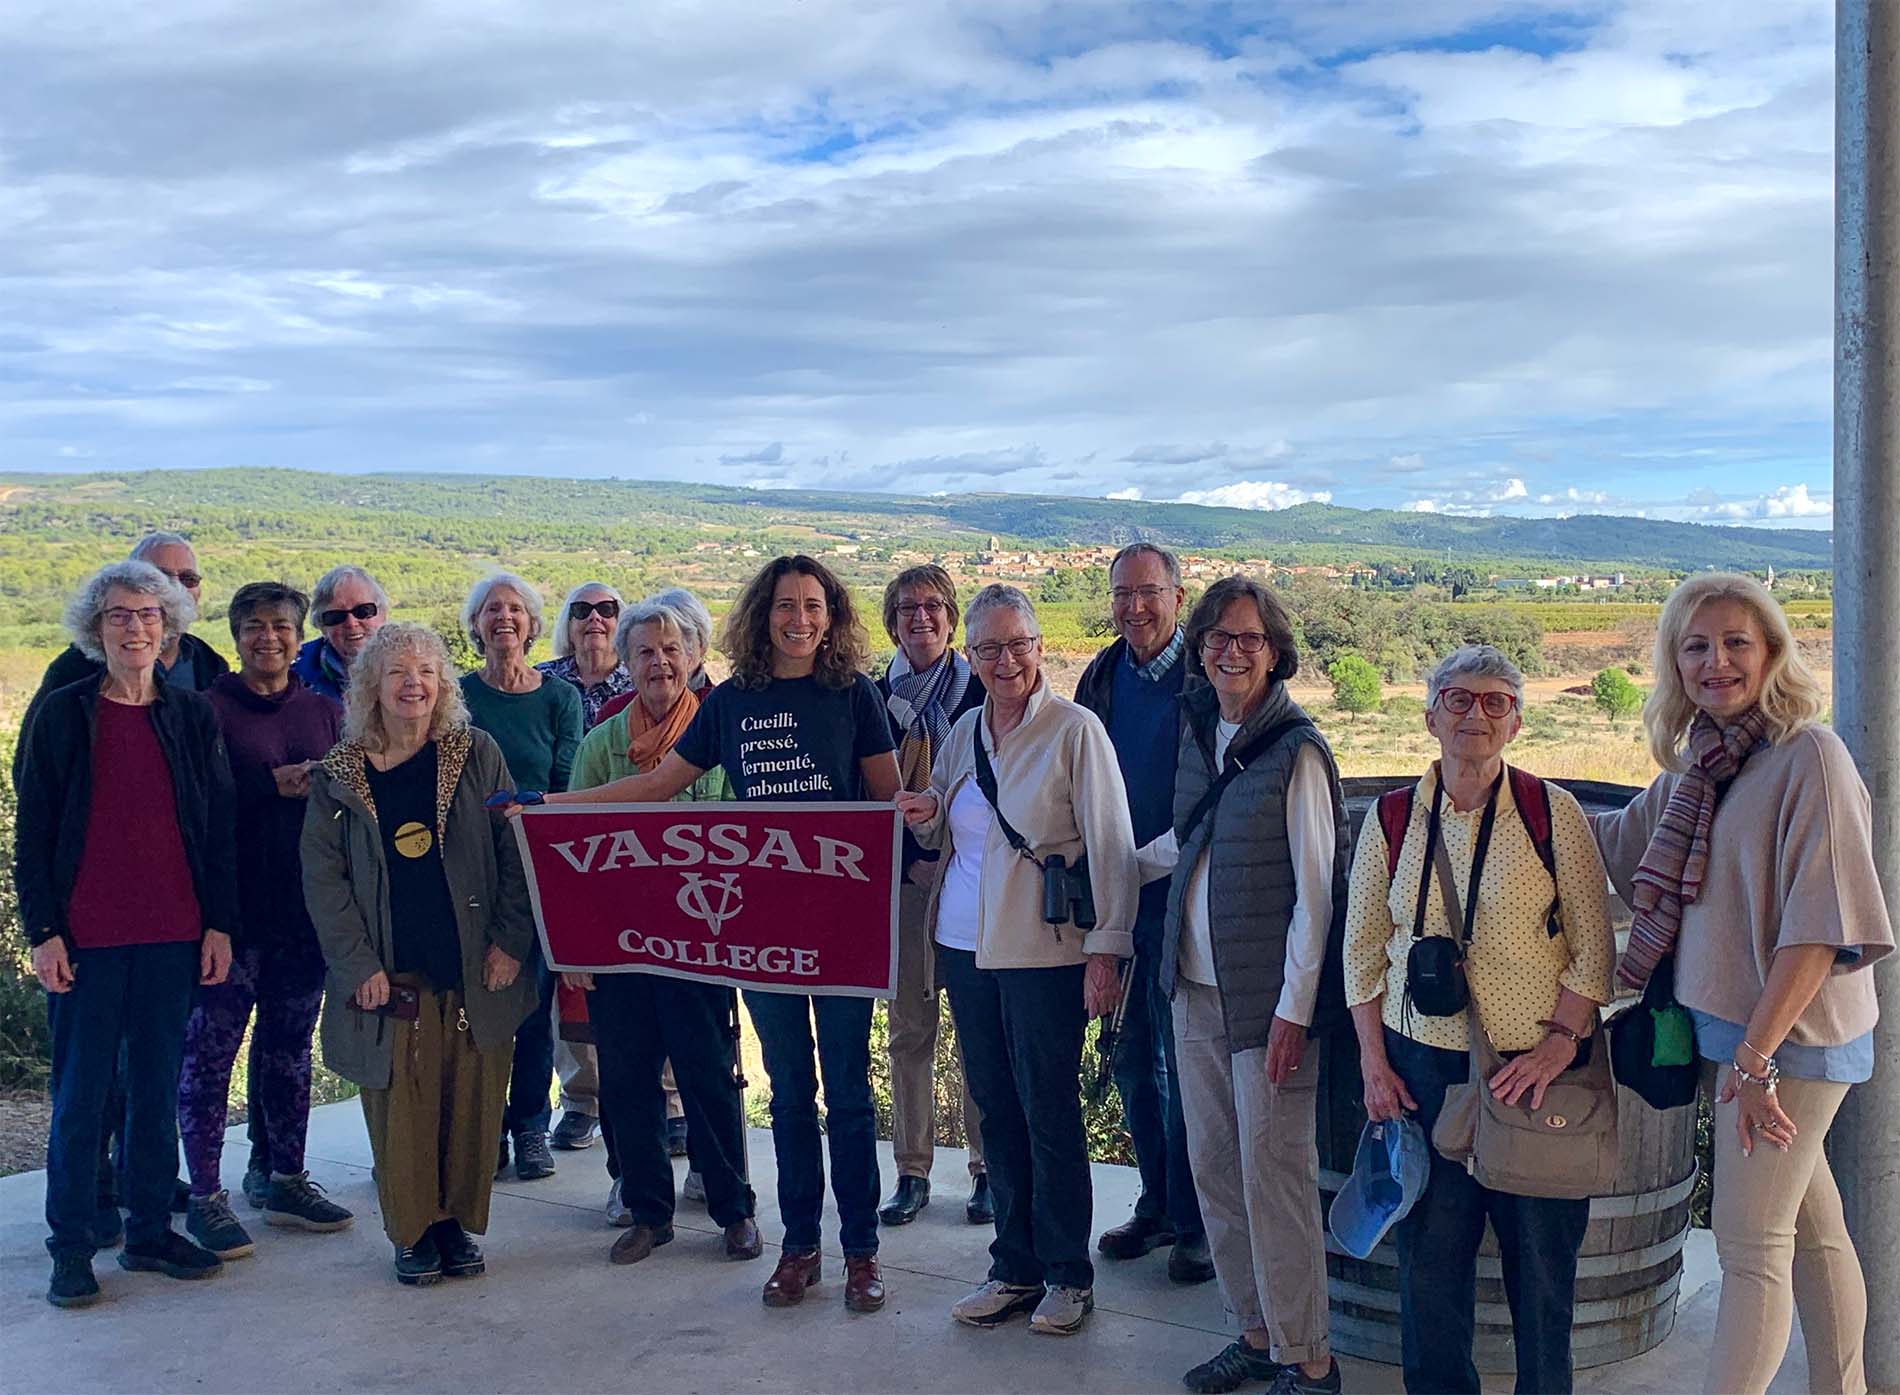 A group of people, one holding a Vassar College banner, standing and smiling at the viewer with a sunny green countryside and cloudy skies behind them.